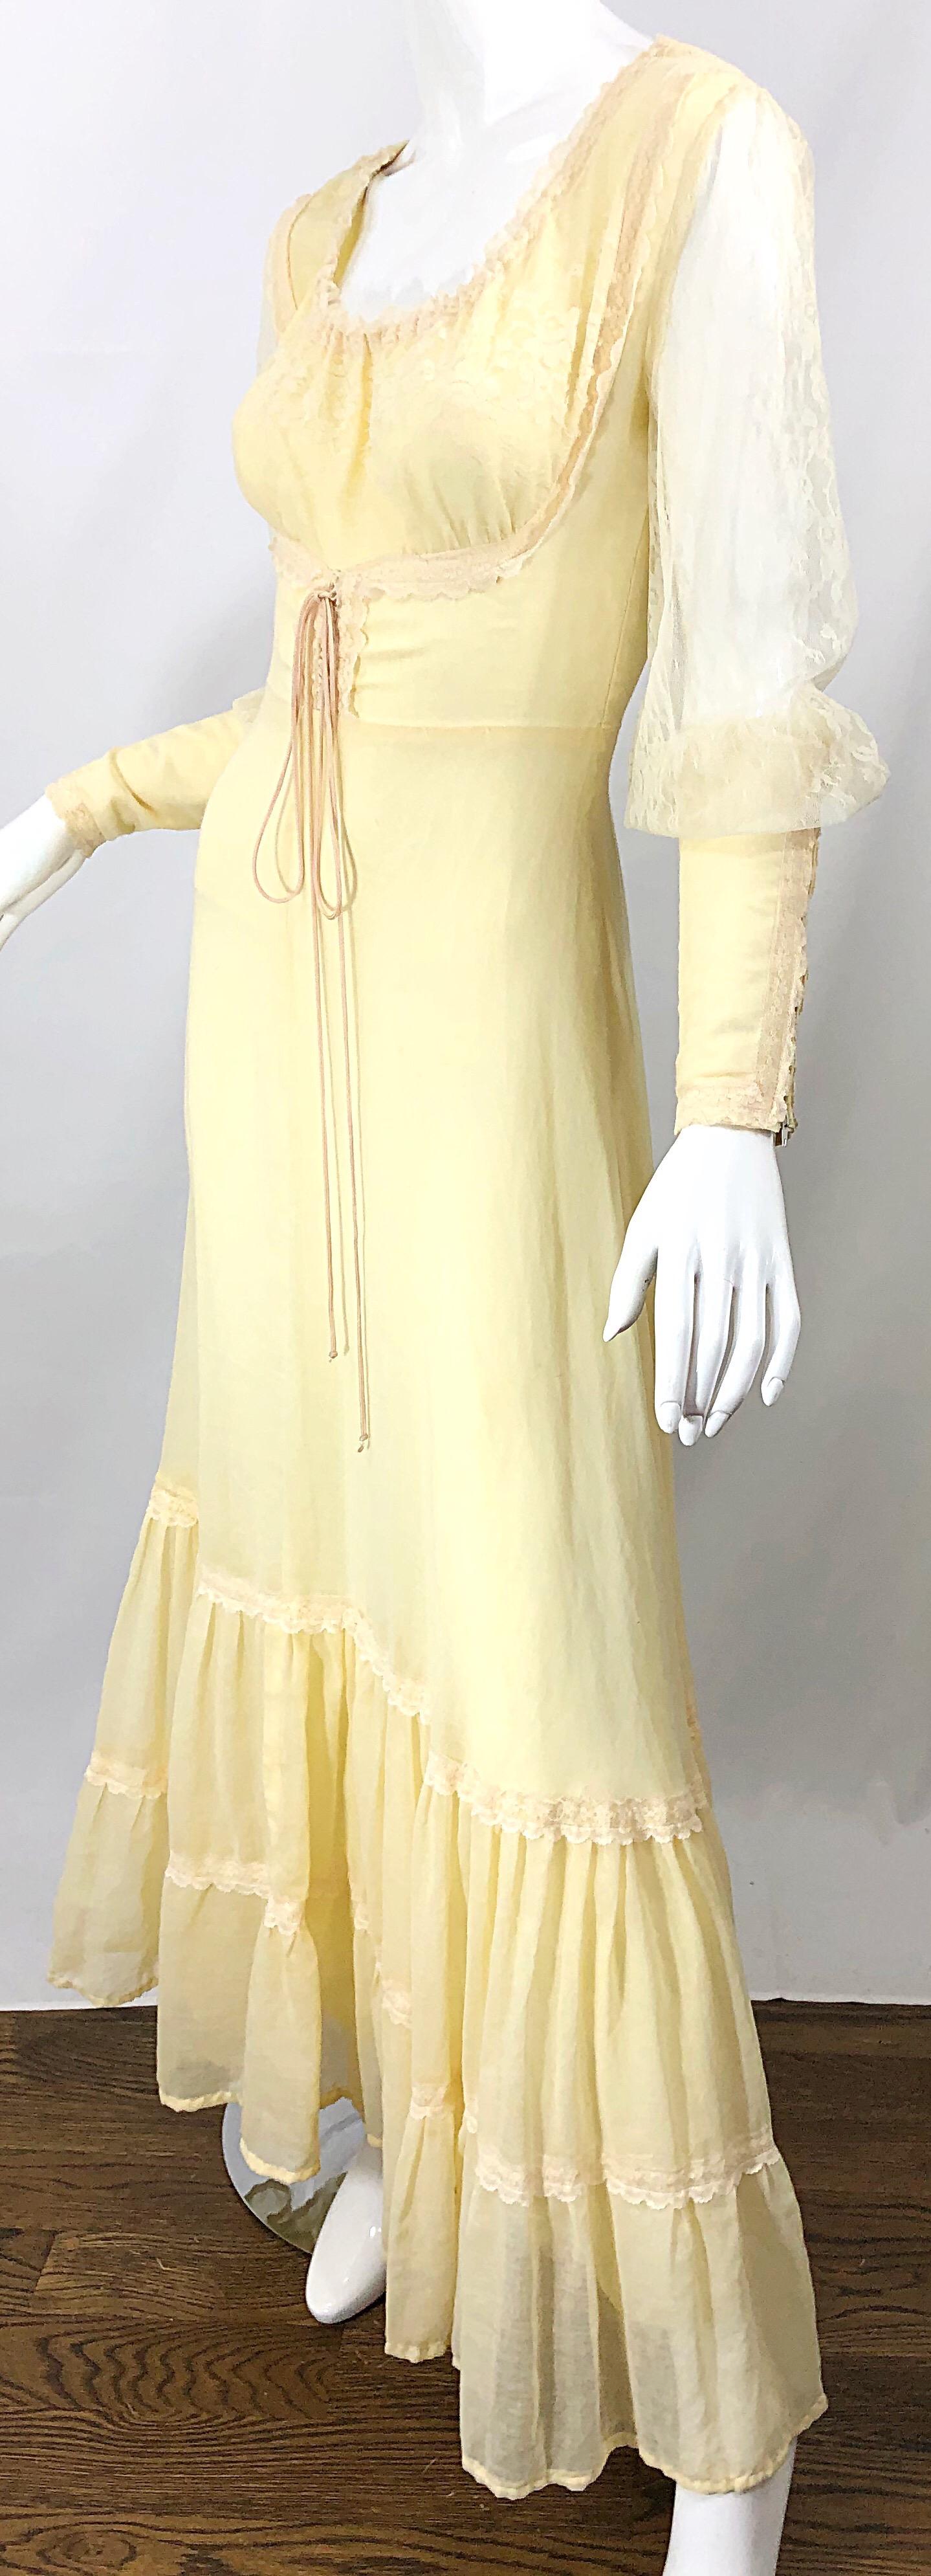 1970s Victorian Inspired Pale Yellow Cotton Voile + Lace Peasant 70s Maxi Dress For Sale 5